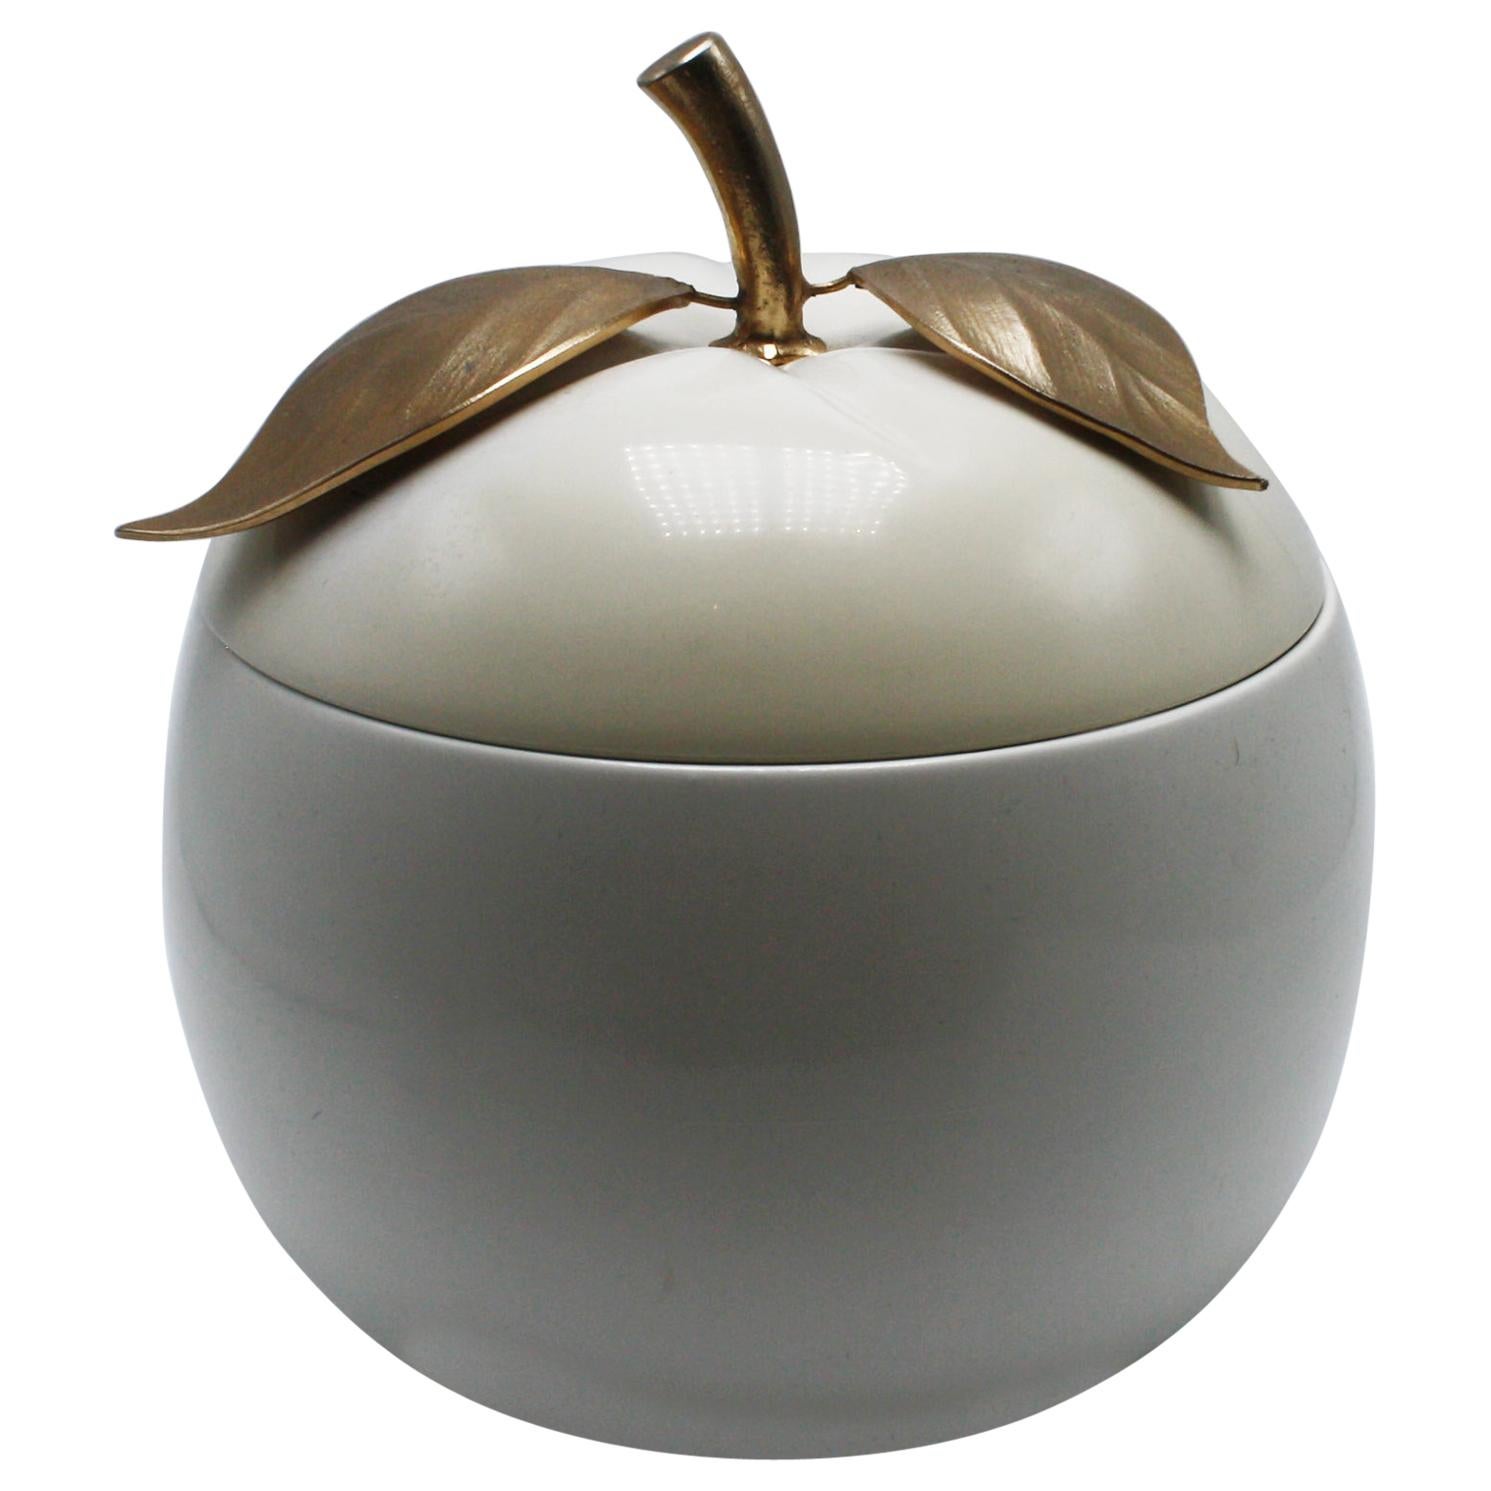 Freddotherm Apple Ice Bucket Gold-Plated by Hans Turnwald, circa 1960